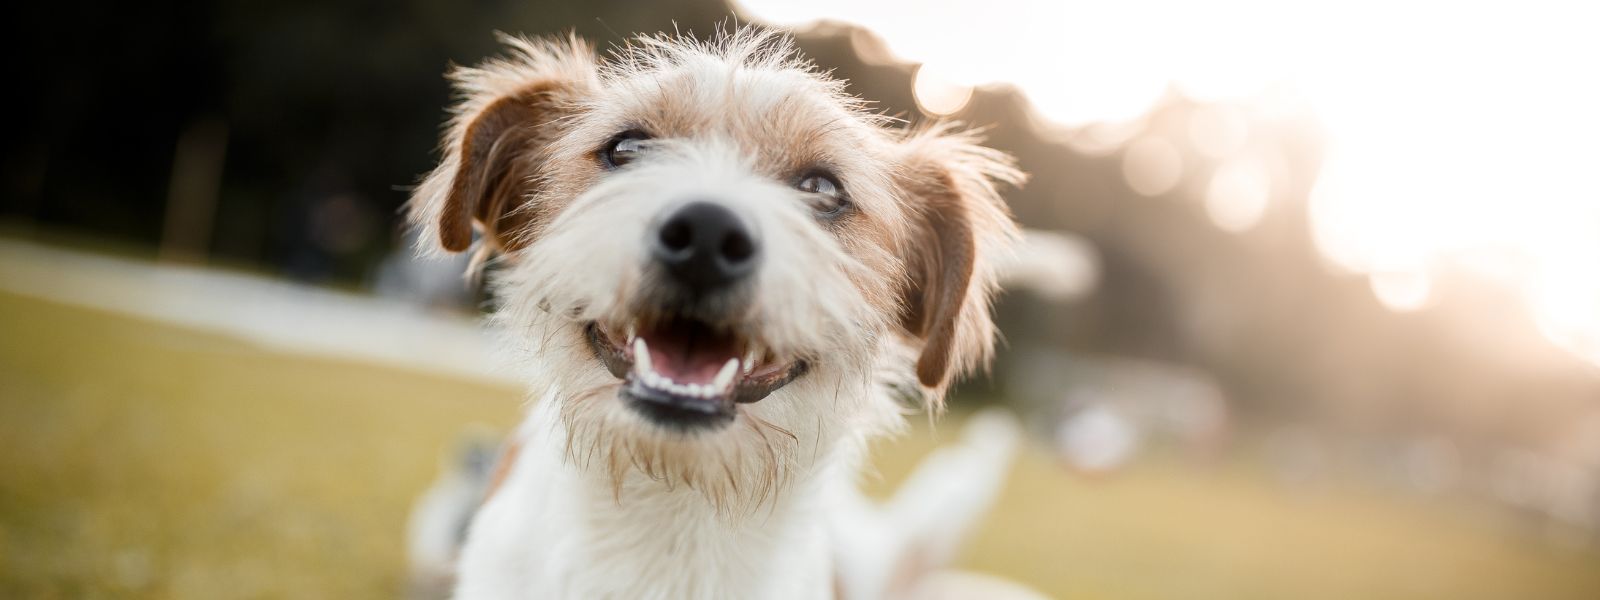 How to Tell if Your Dog is Happy